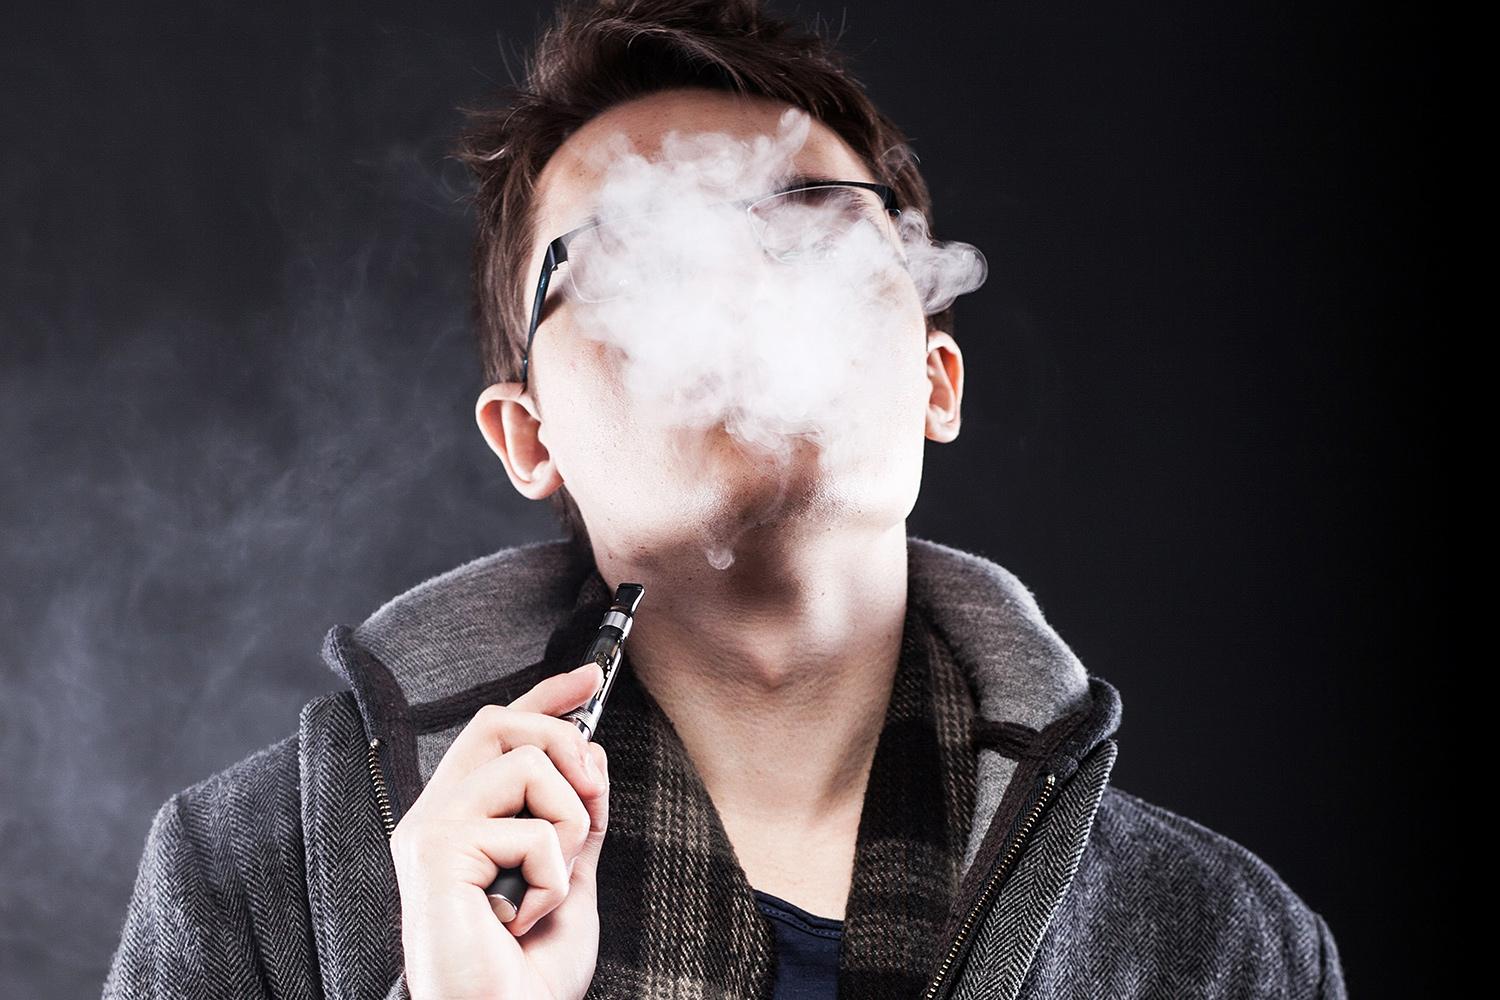 E-Cigarettes Popularity Attributed to Cool Factor